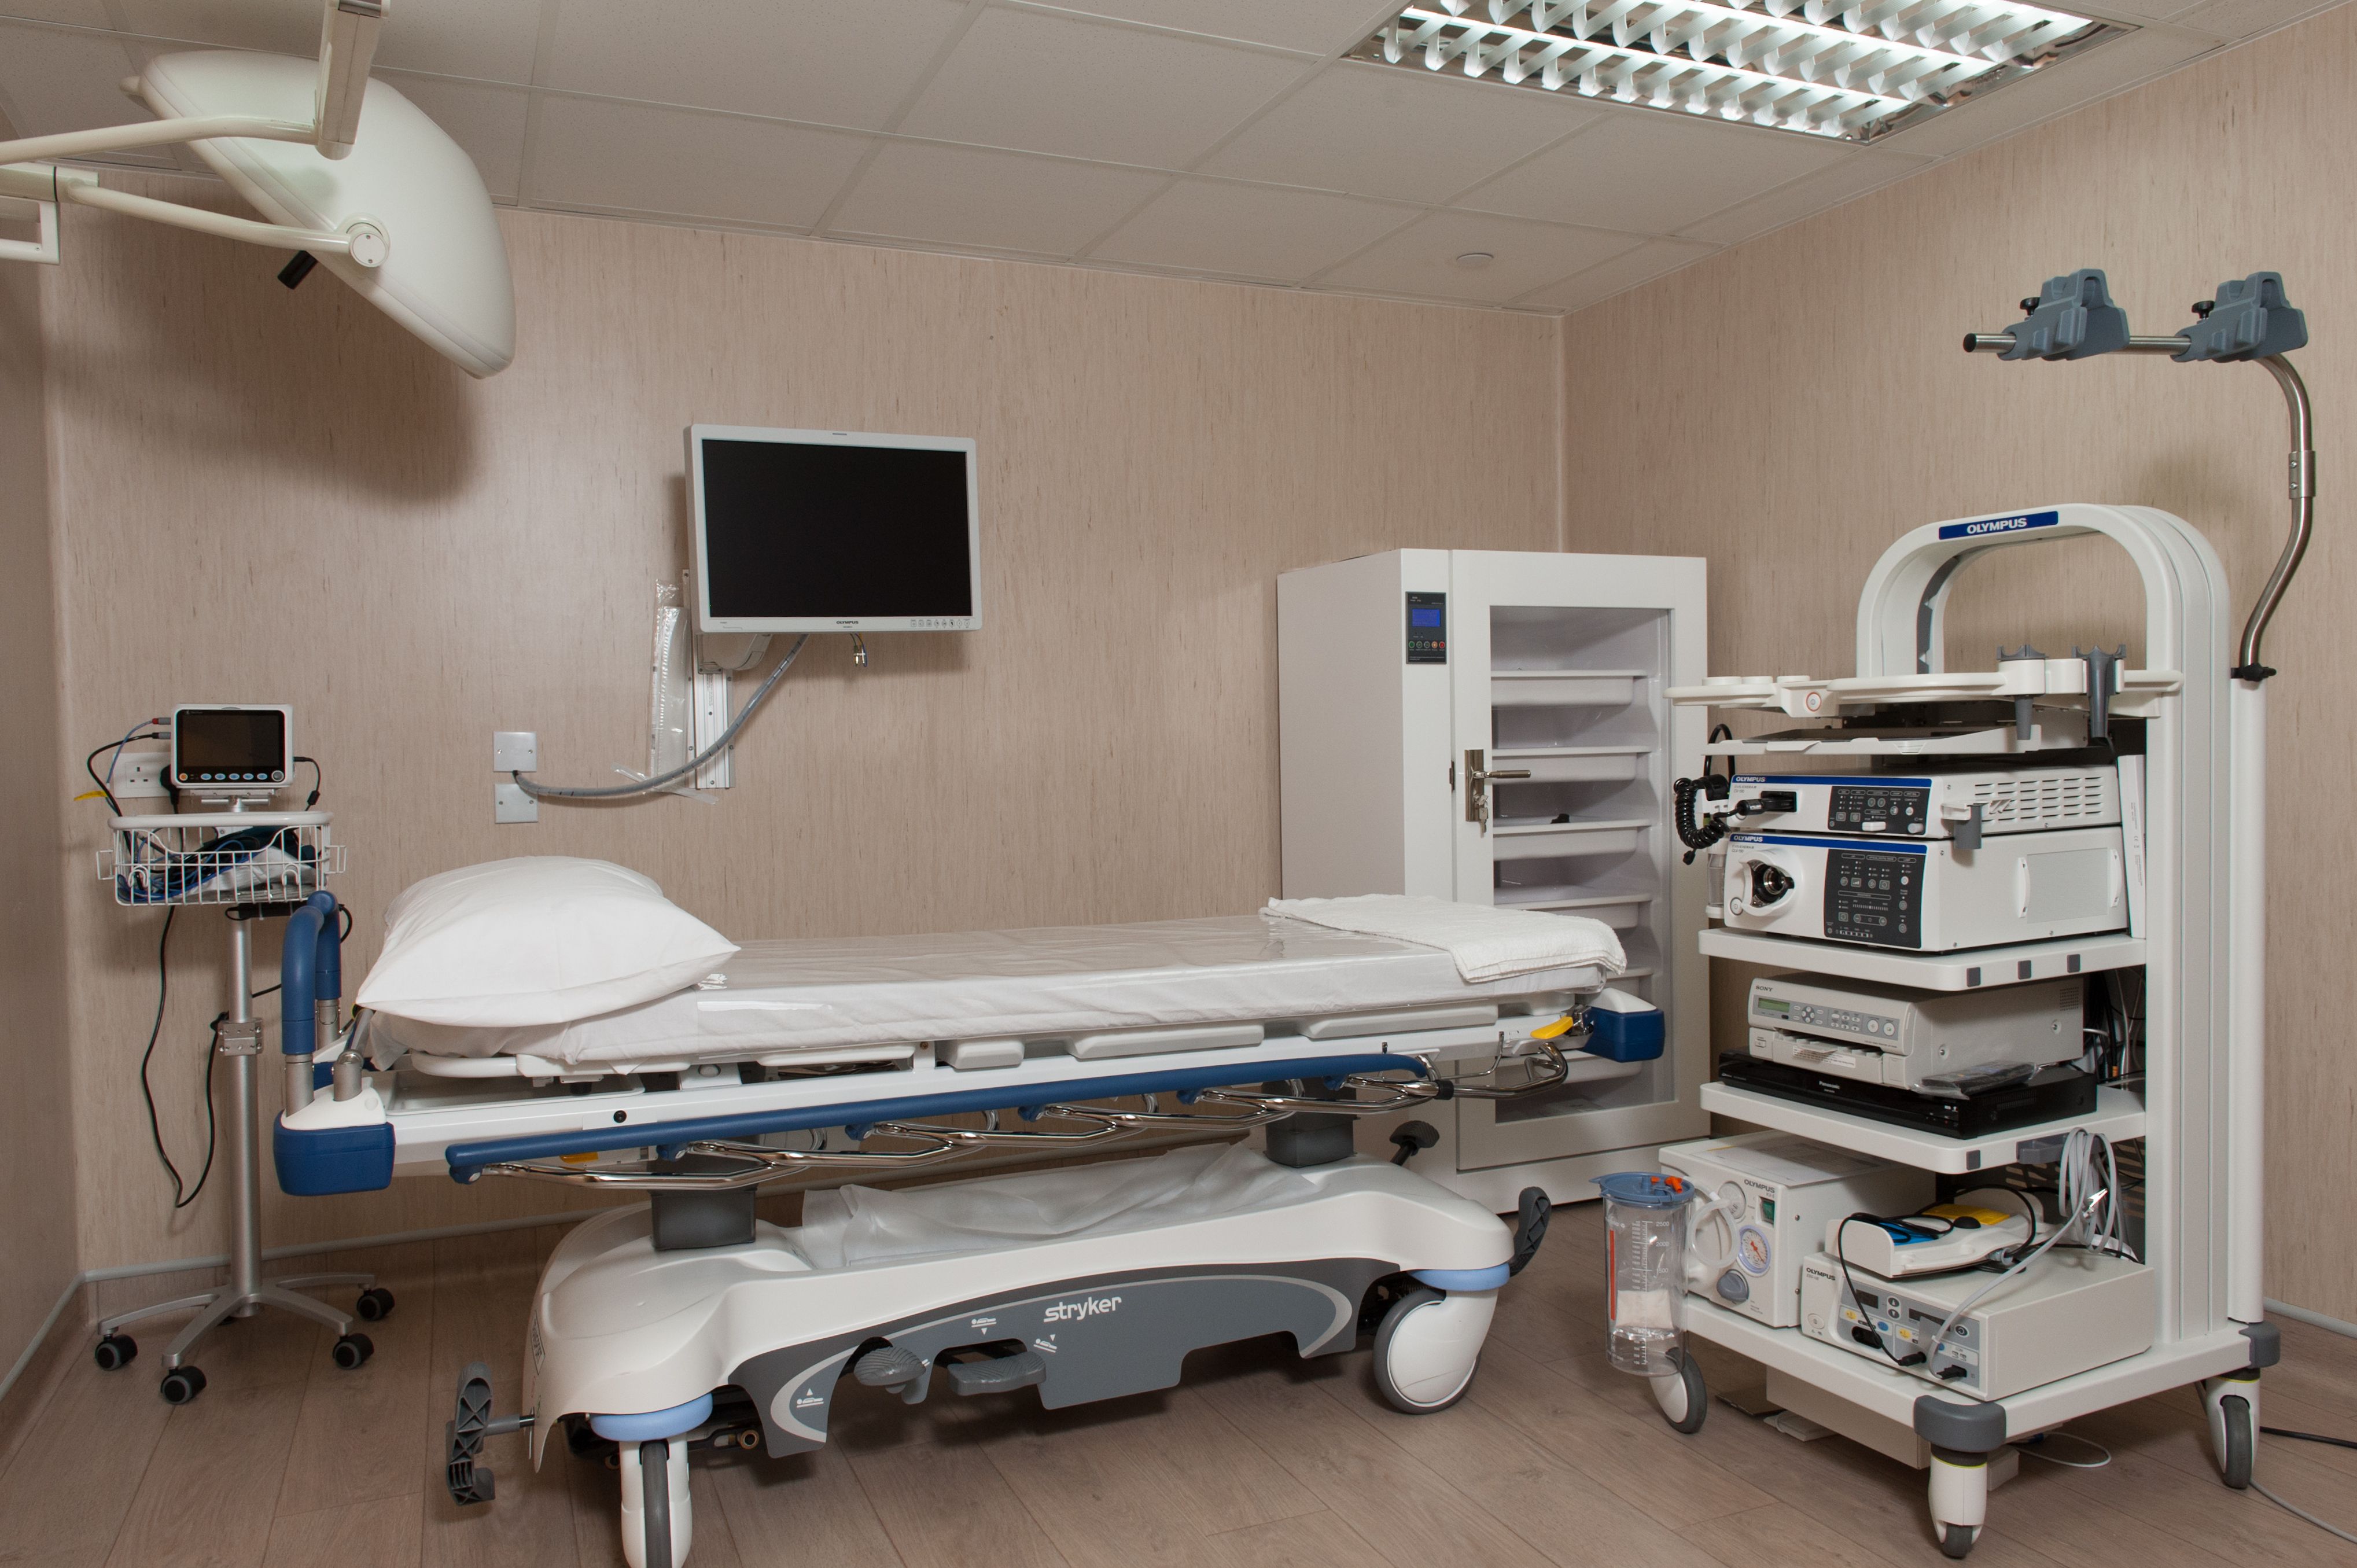 Examination room with patient bed and medical equipment